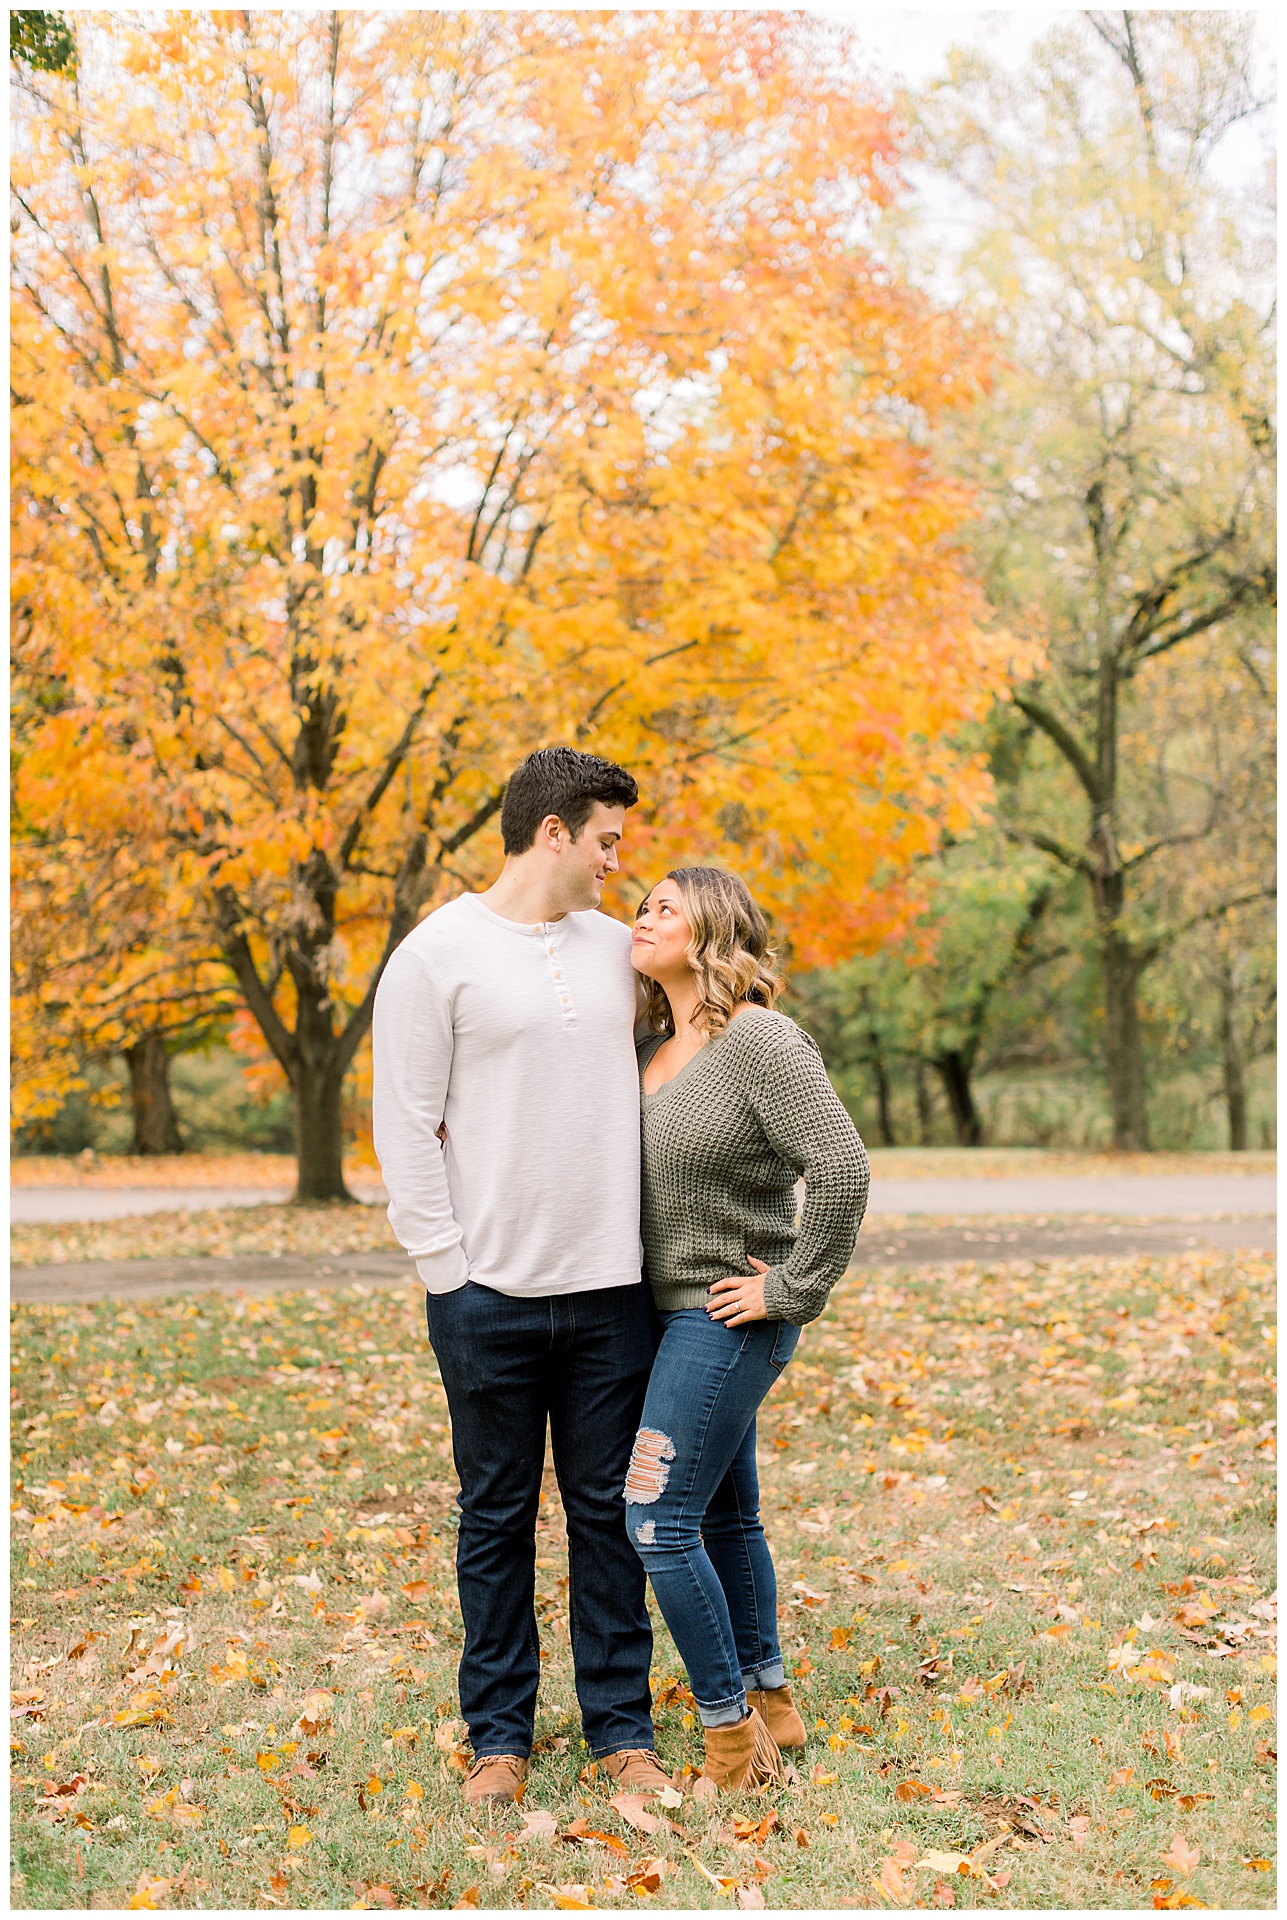 engagement photo session at a colorful park in fall